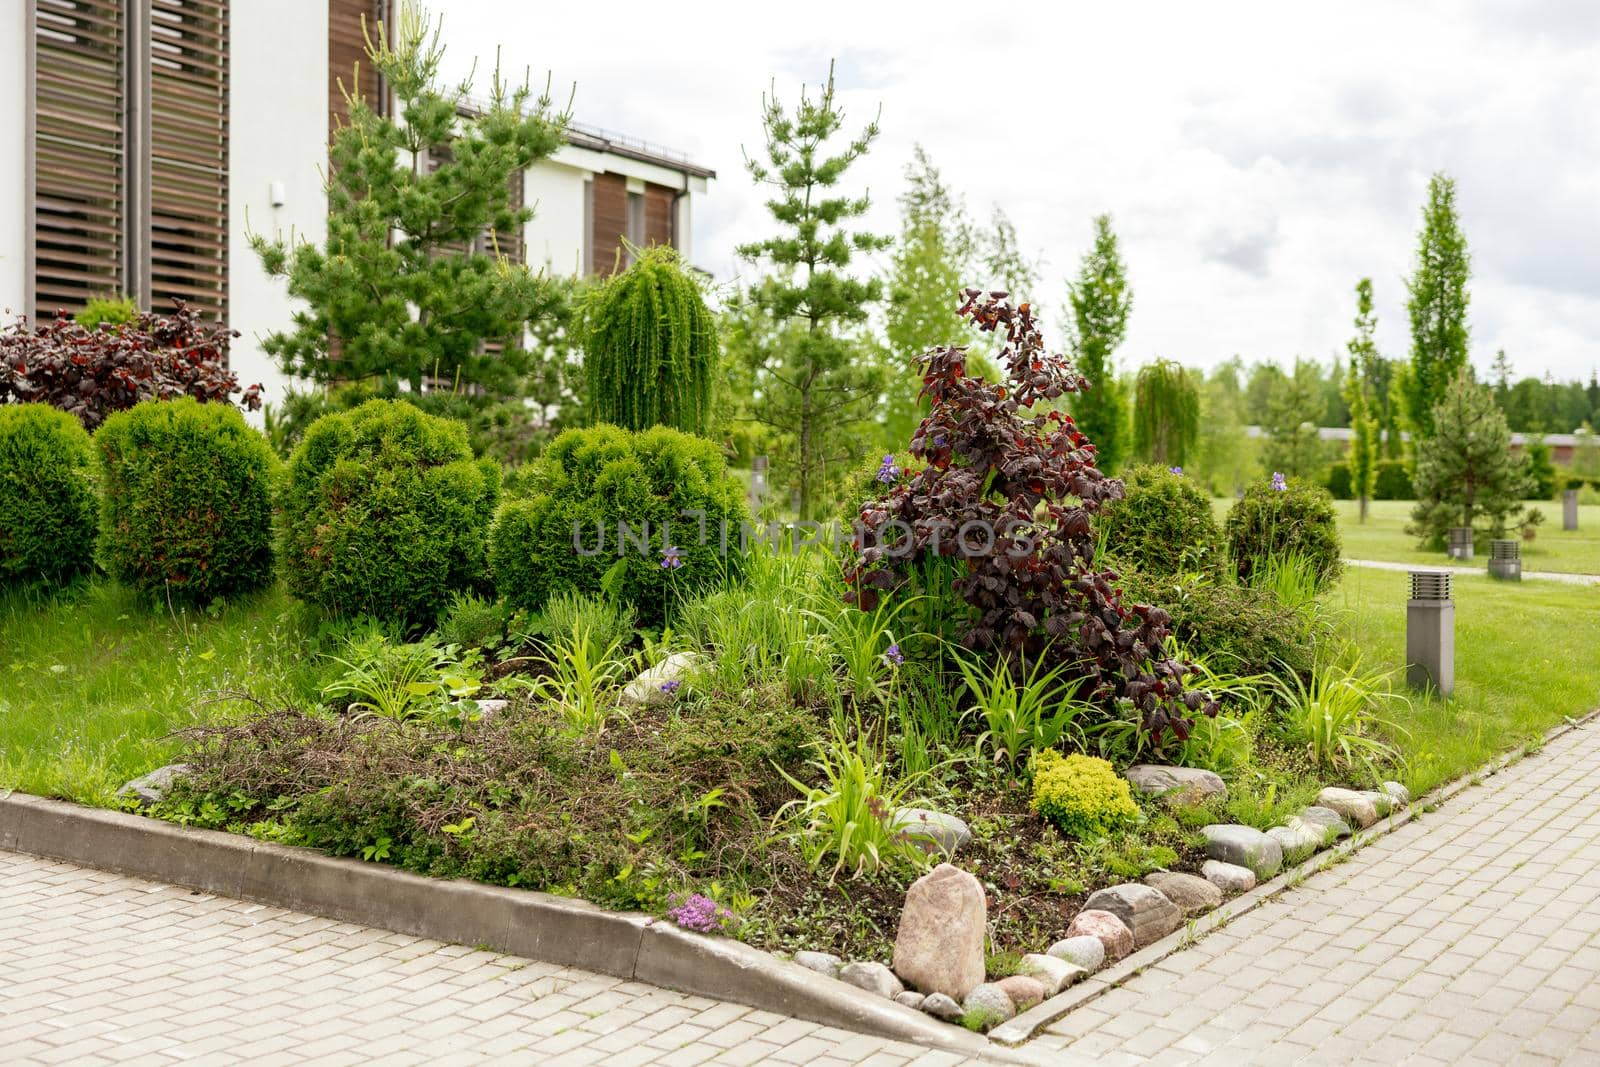 Various plants and stones in front of modern house, front yard. Landscape design. Beautiful garden. Modern urban living residences with private courtyards. Green outdoor facilities, lawn. Garden care